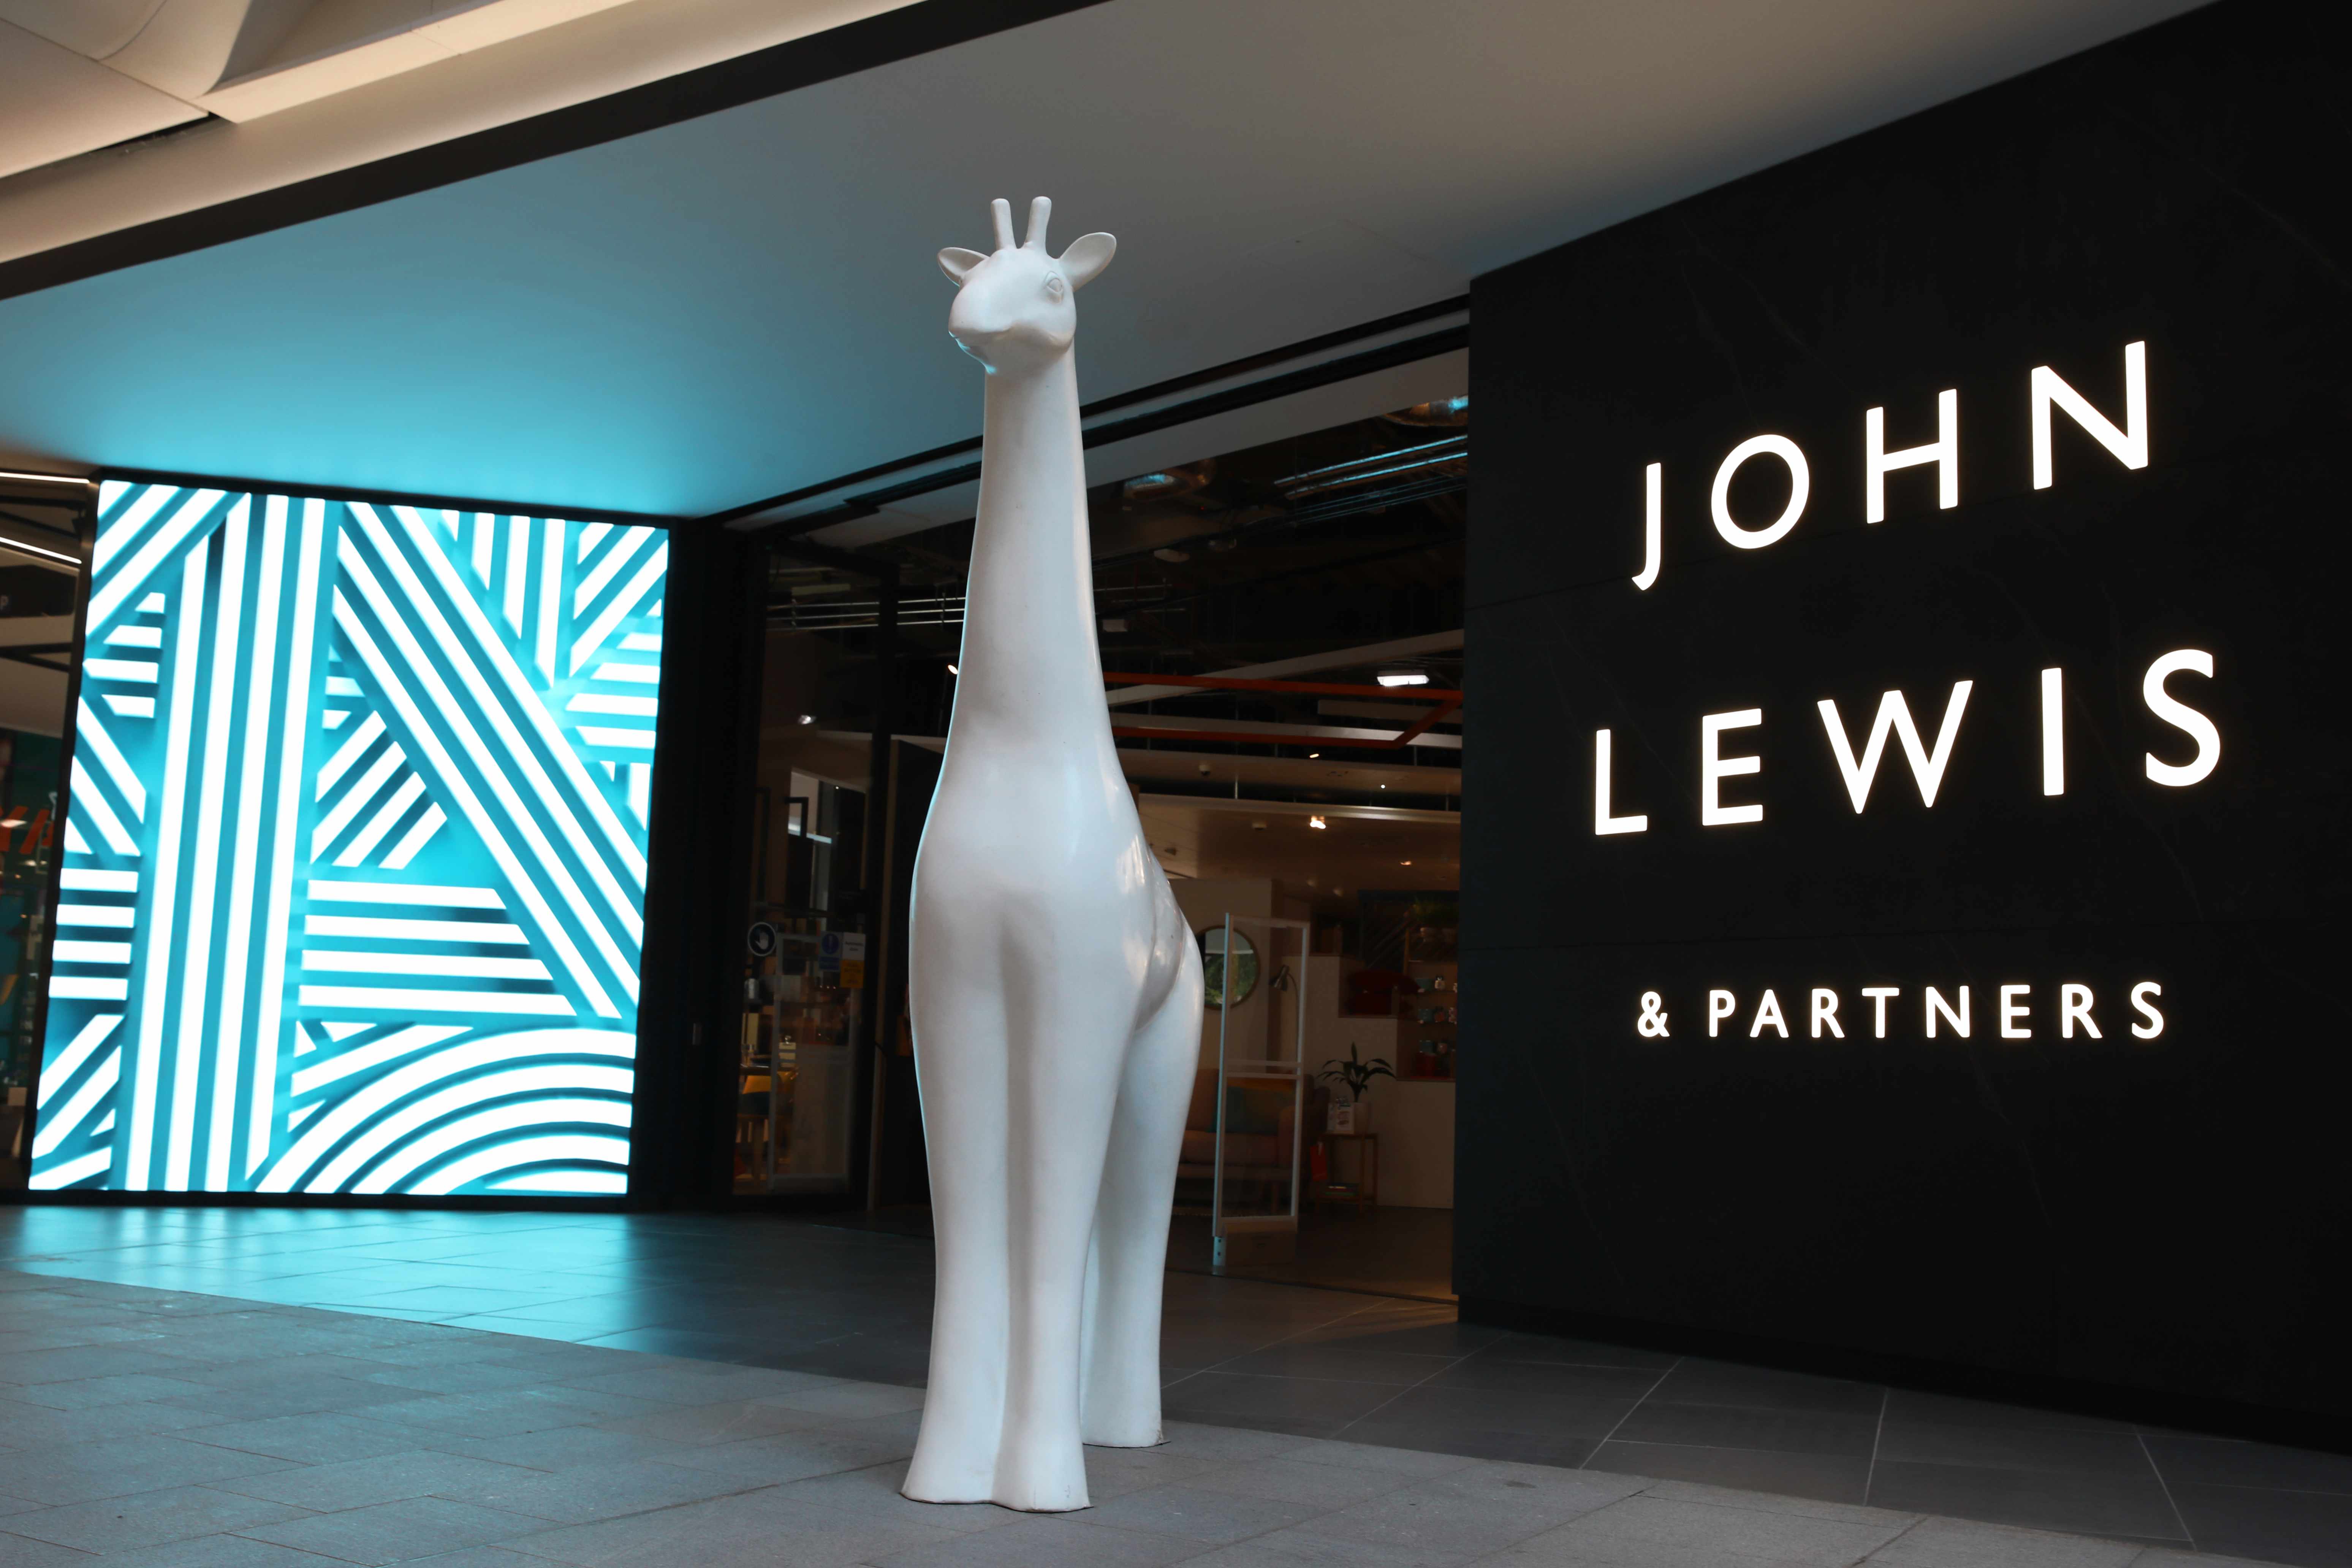 Blank giraffe about town statue outside John Lewis

Image: LAURA MOORE 2021